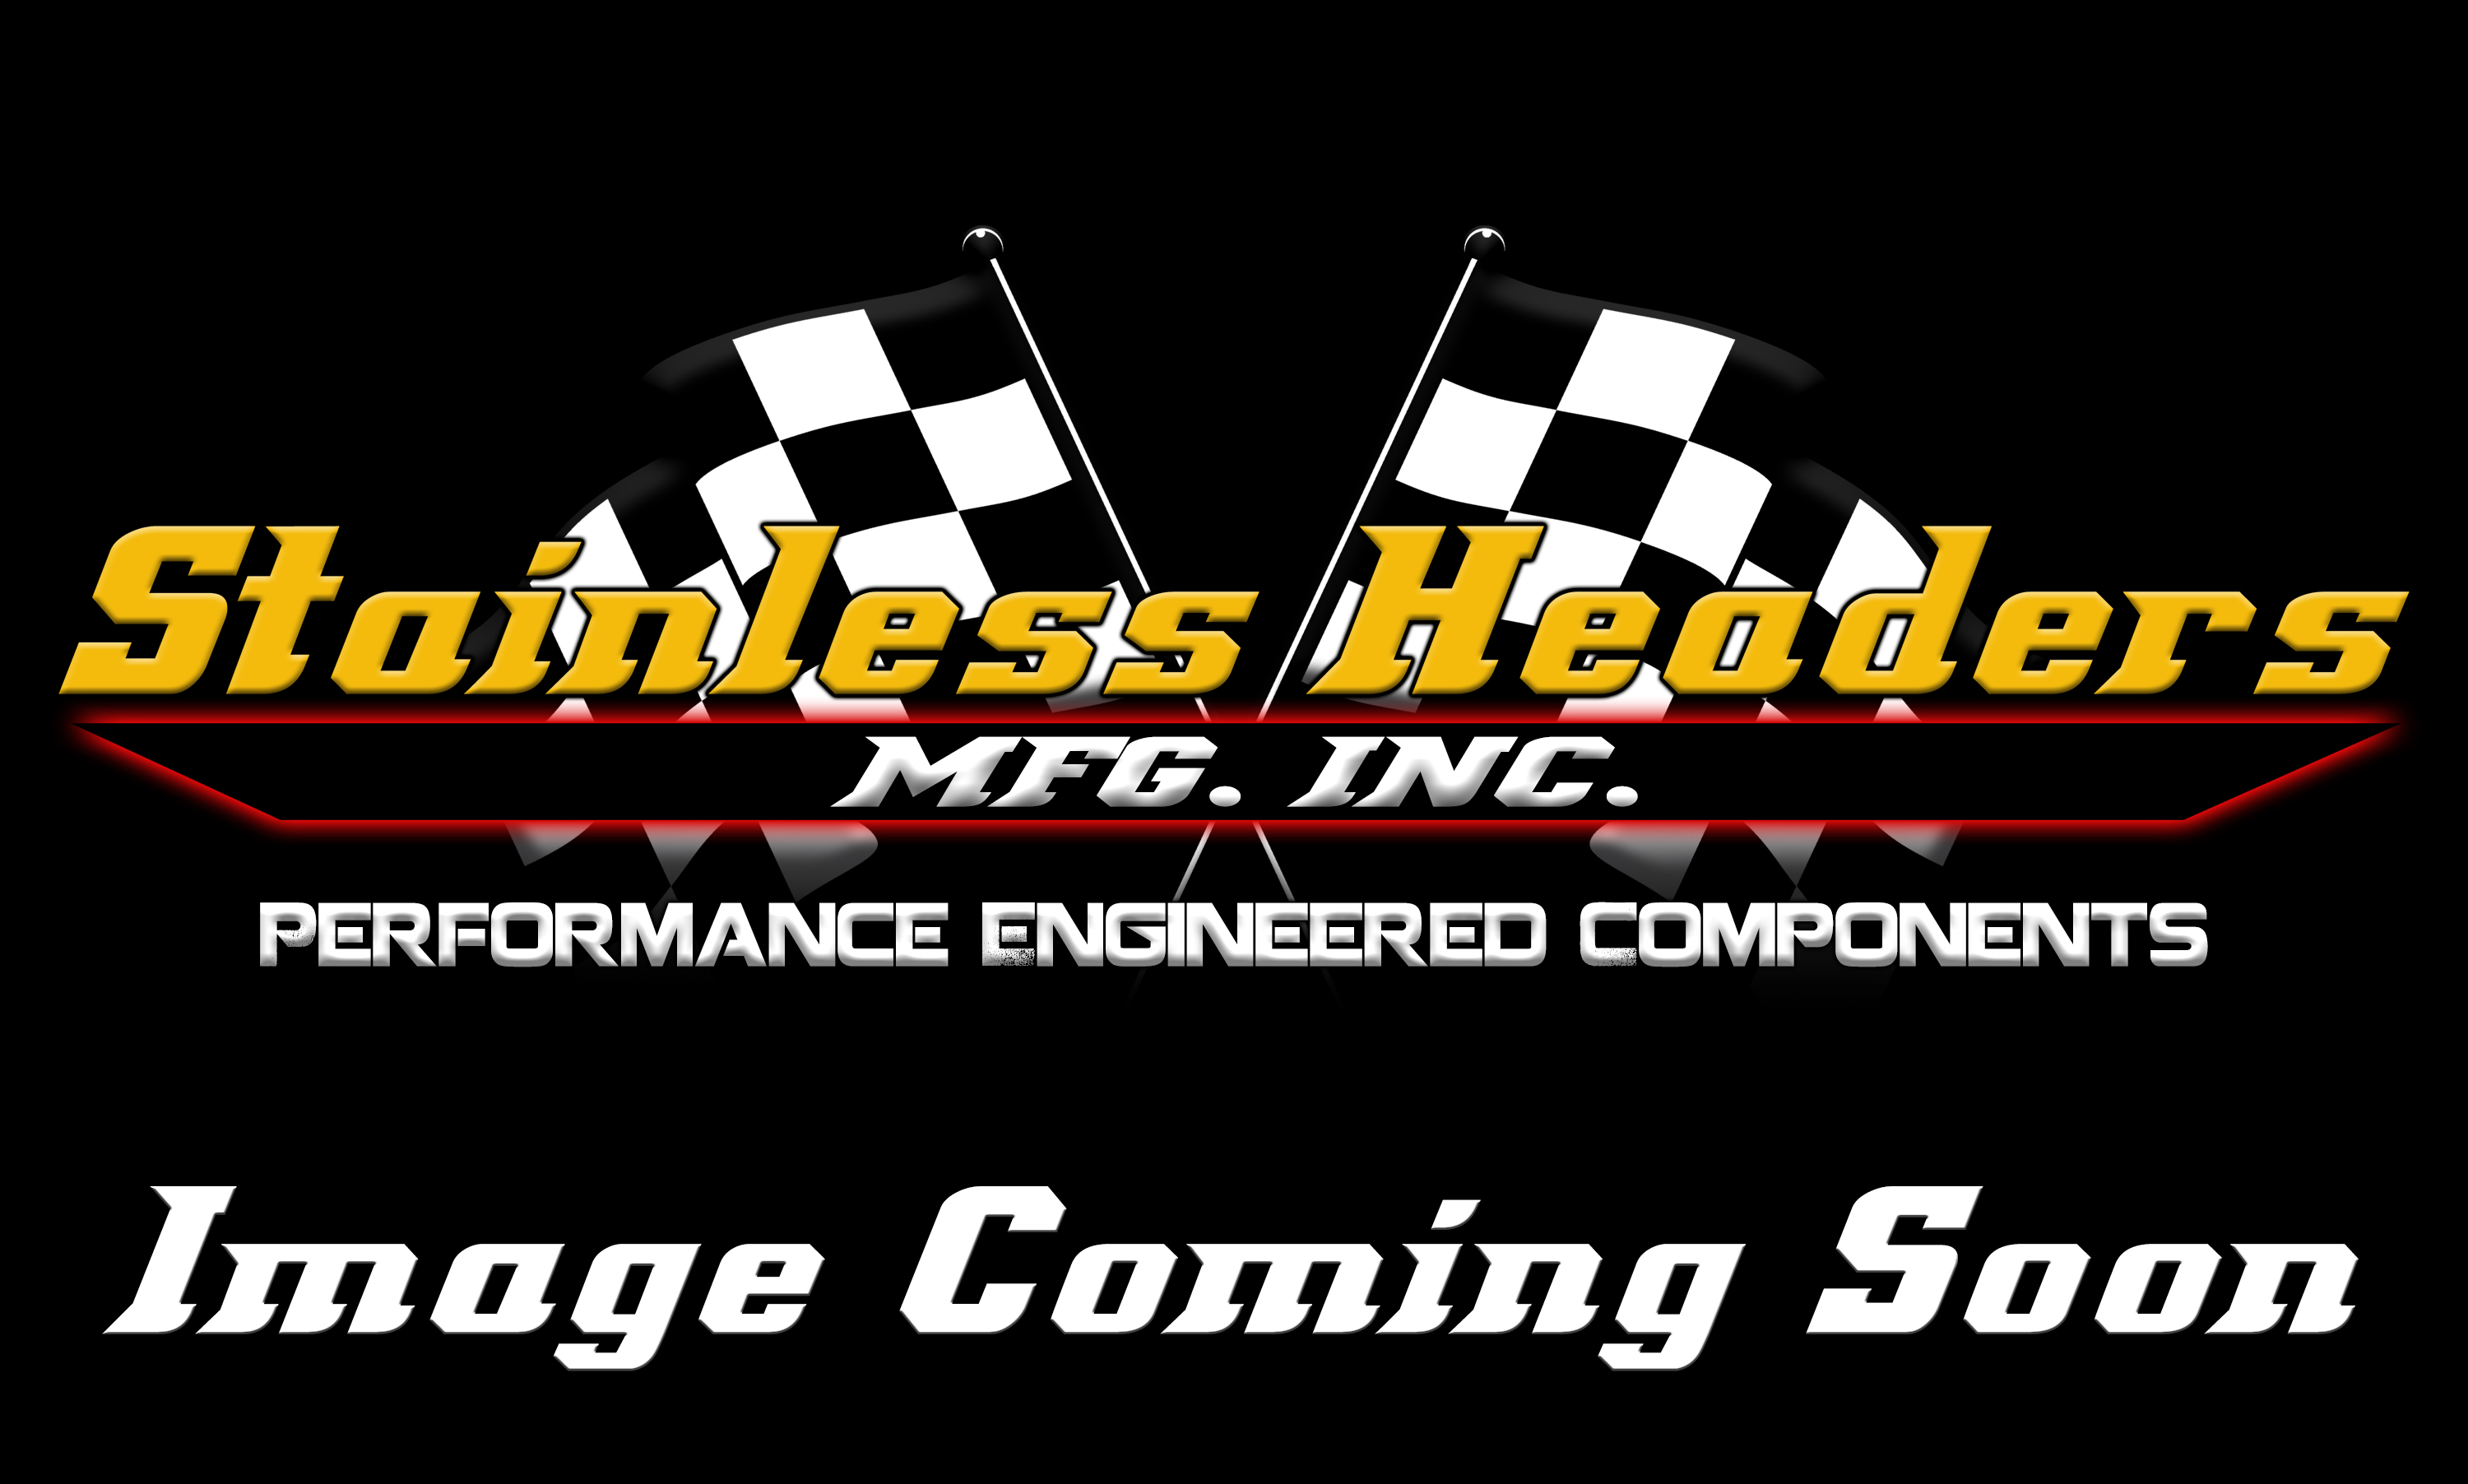 Stainless Headers - 1 3/4" Primary 4 into 1 Performance Merge Collector-16ga 321ss - Image 2